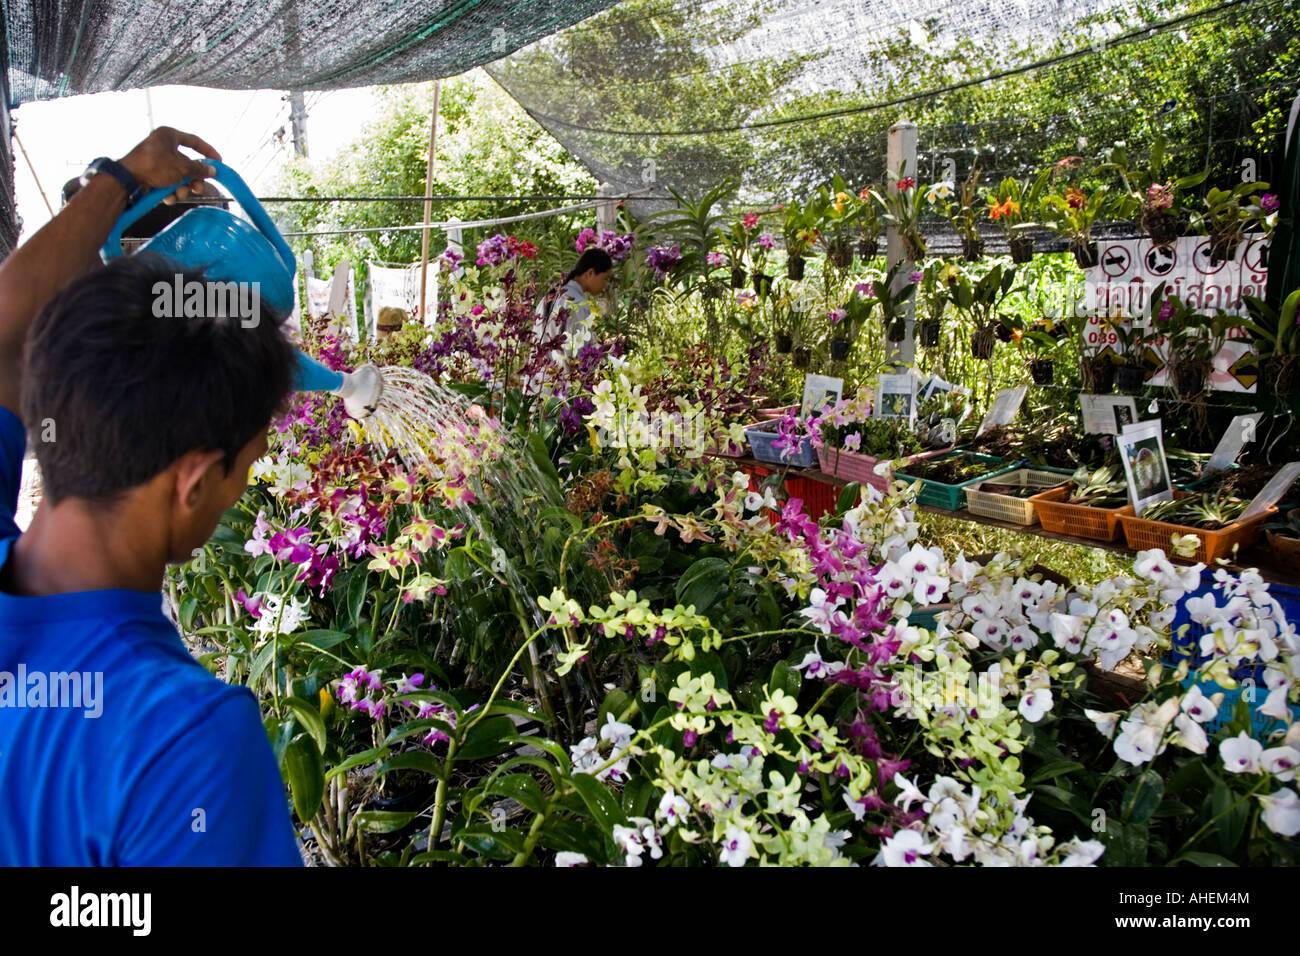 Market stall holder with a large display of orchids in Banchang Thailand. The owner is watering the plants and flowers. Stock Photo